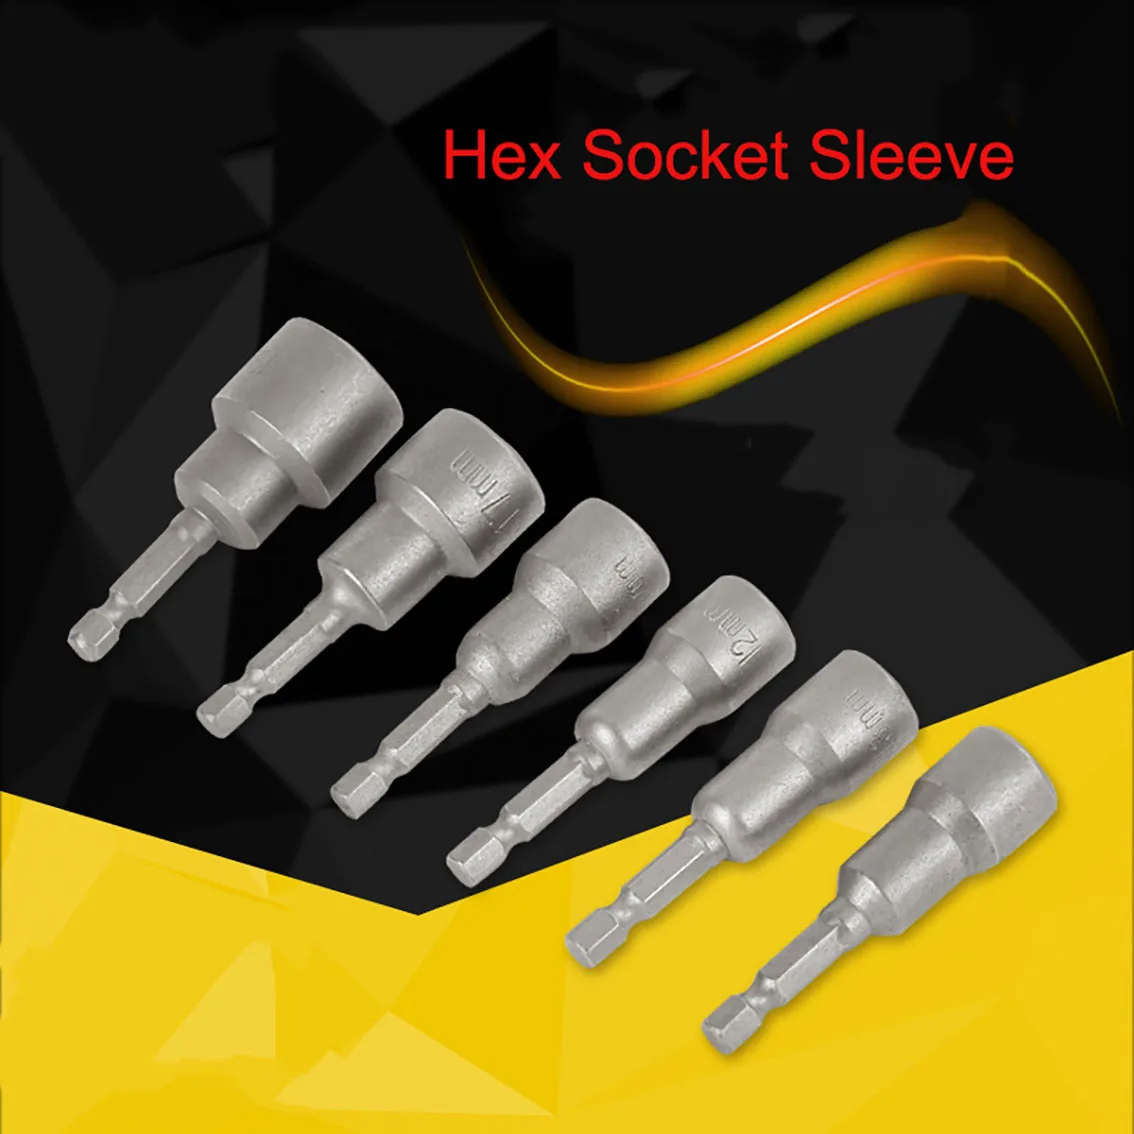 

10Pcs Lengthen Hex Socket Sleeve Bit Nut Driver 6mm-19mm for Power Drills Impact Drivers Hand Drills Tools Parts Length 42-300mm